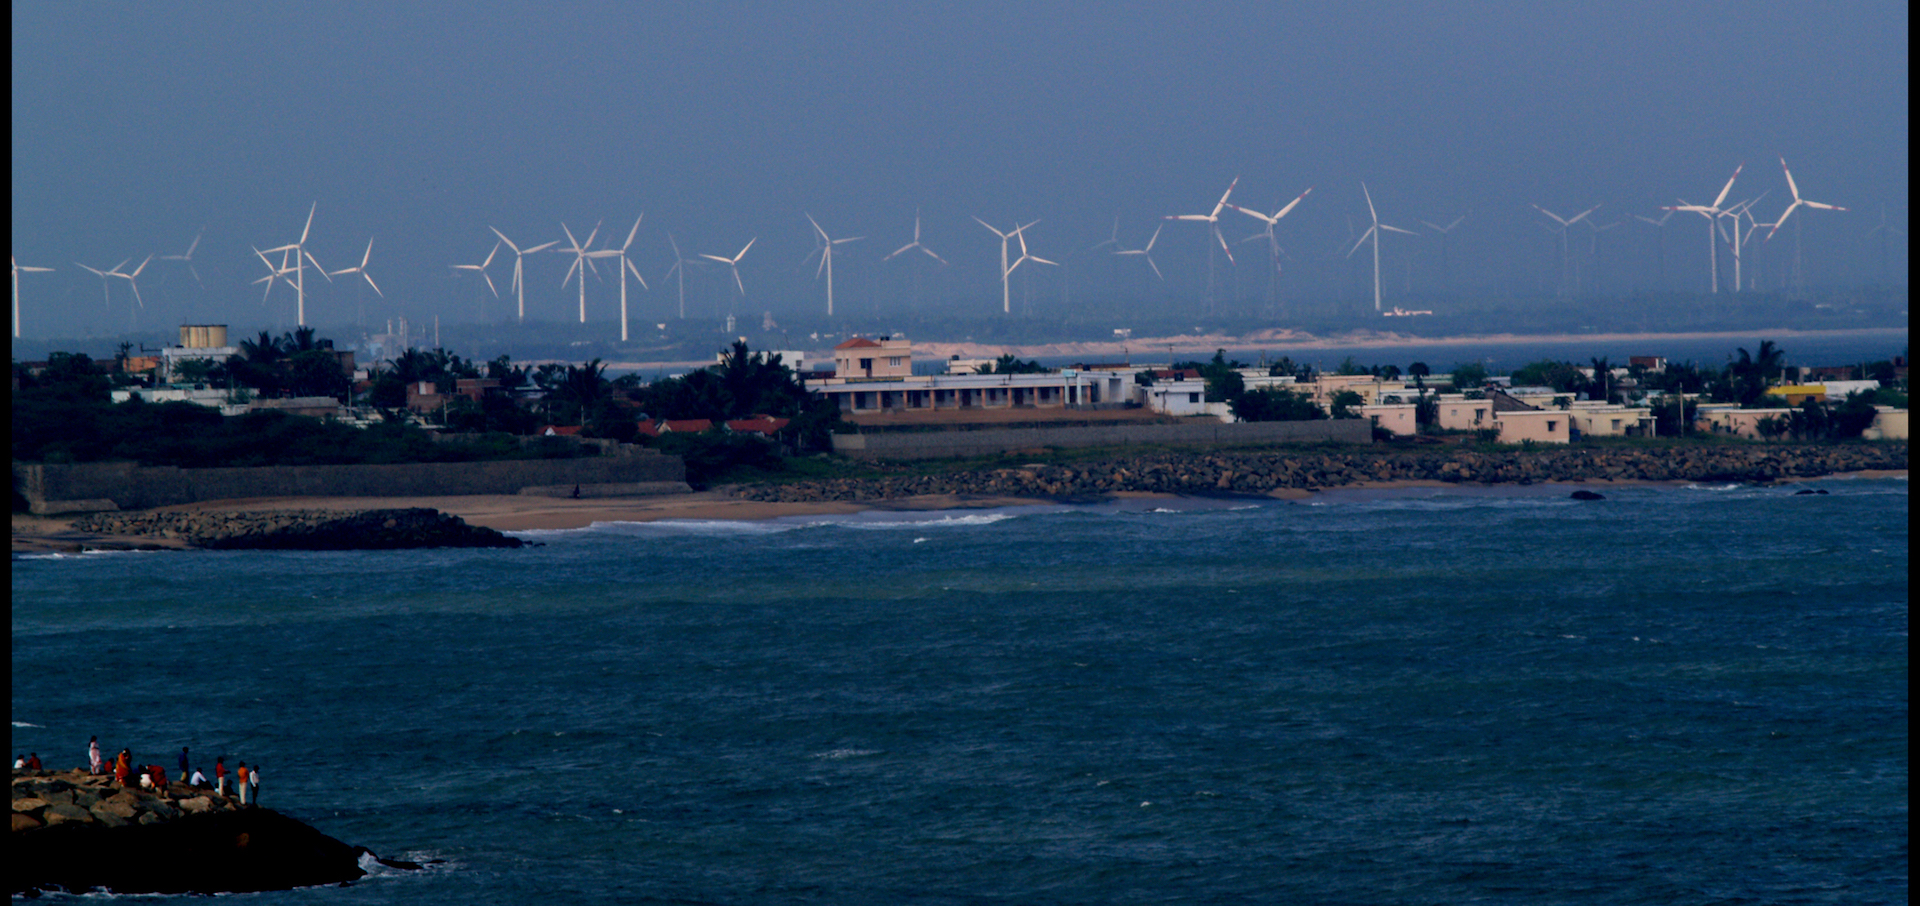 windmills seen from the coastline with people looking from an island